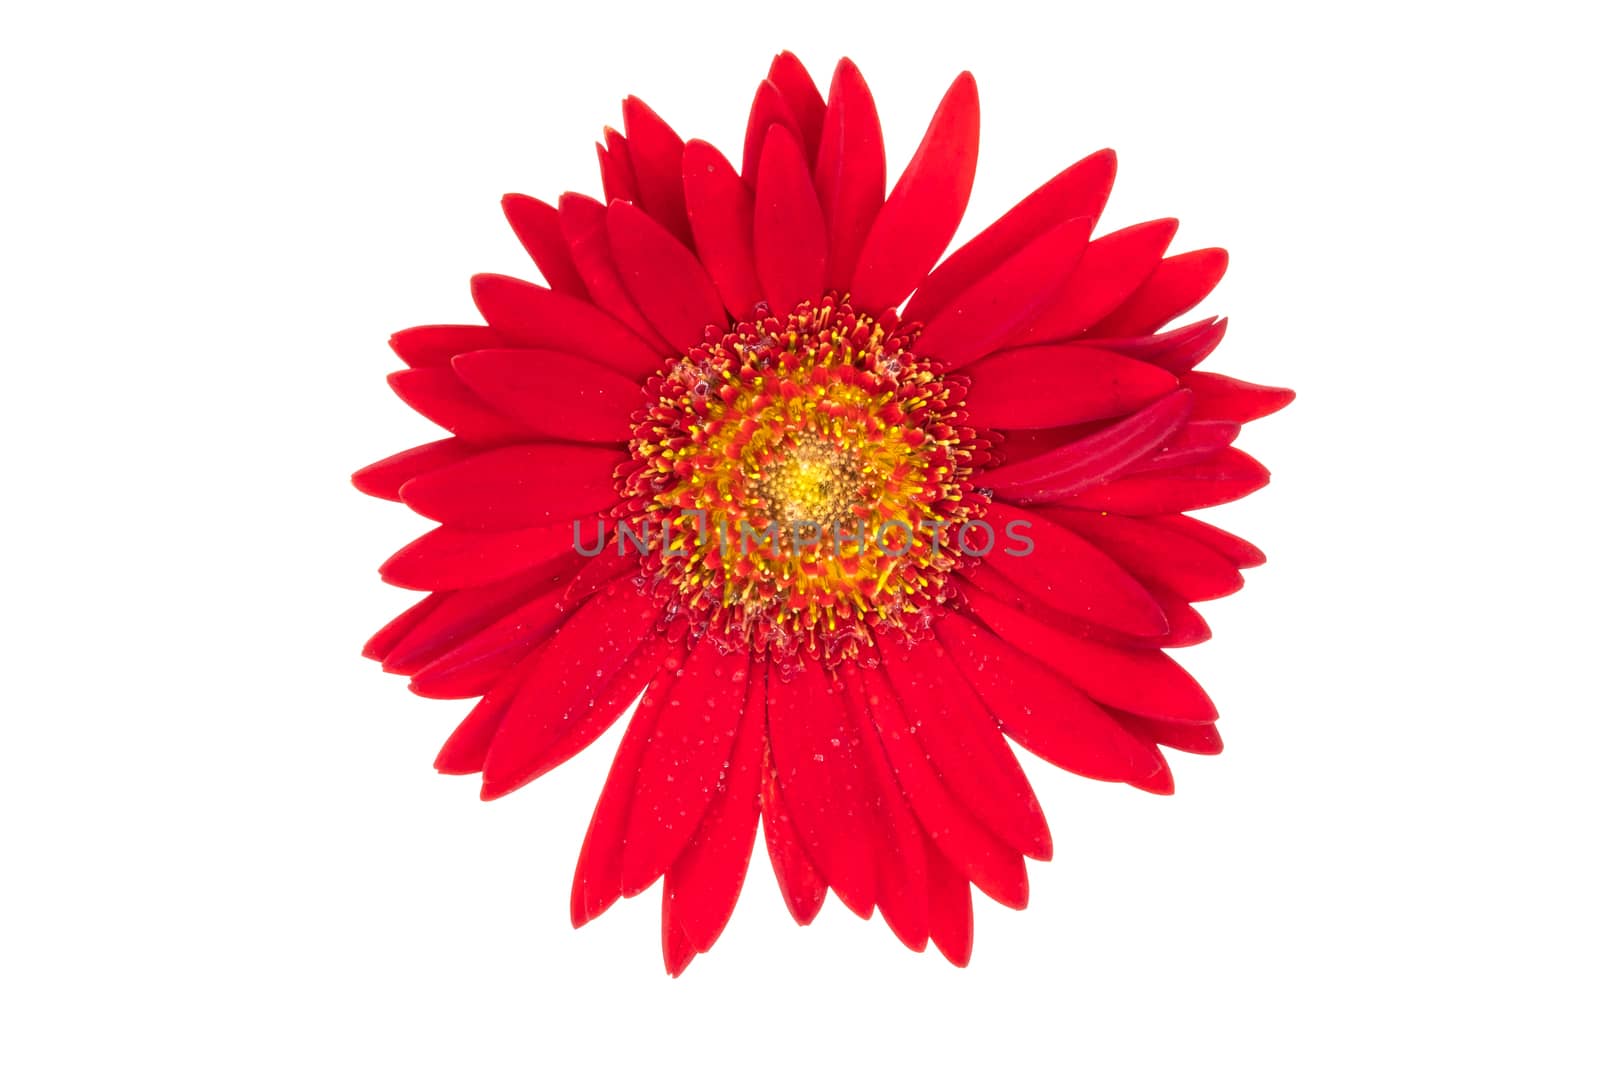 a beautiful red flower in bloom, isolated on white backgroud